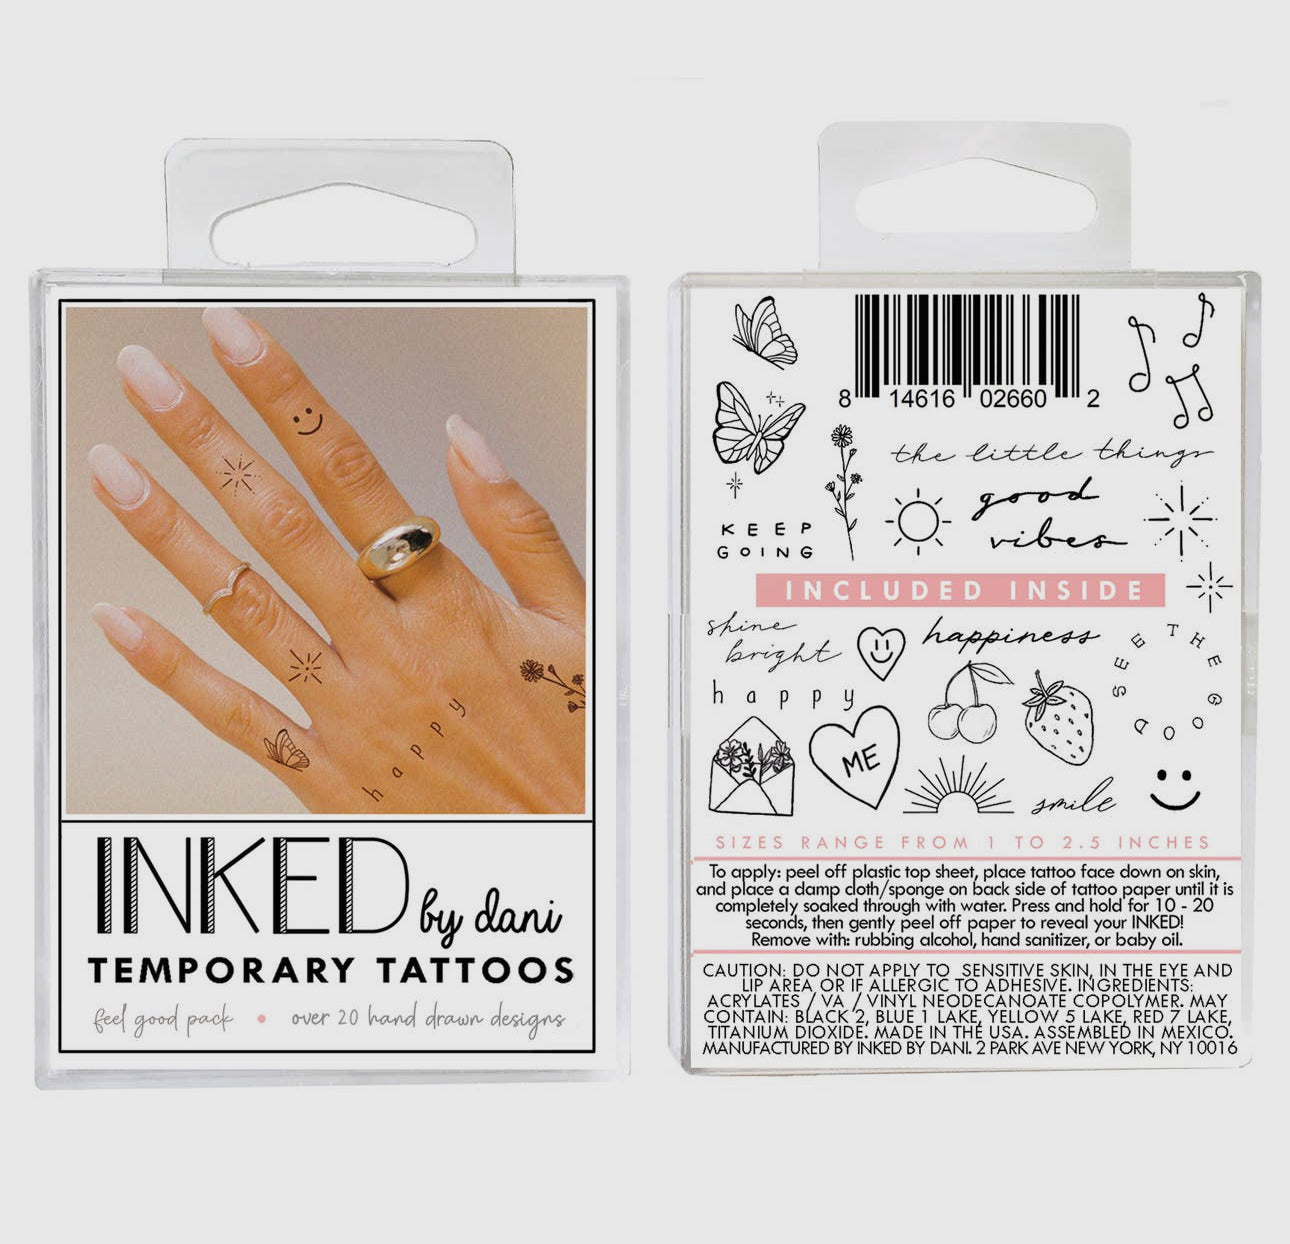 INKED Temporary Tattoos - Feel Good Pack